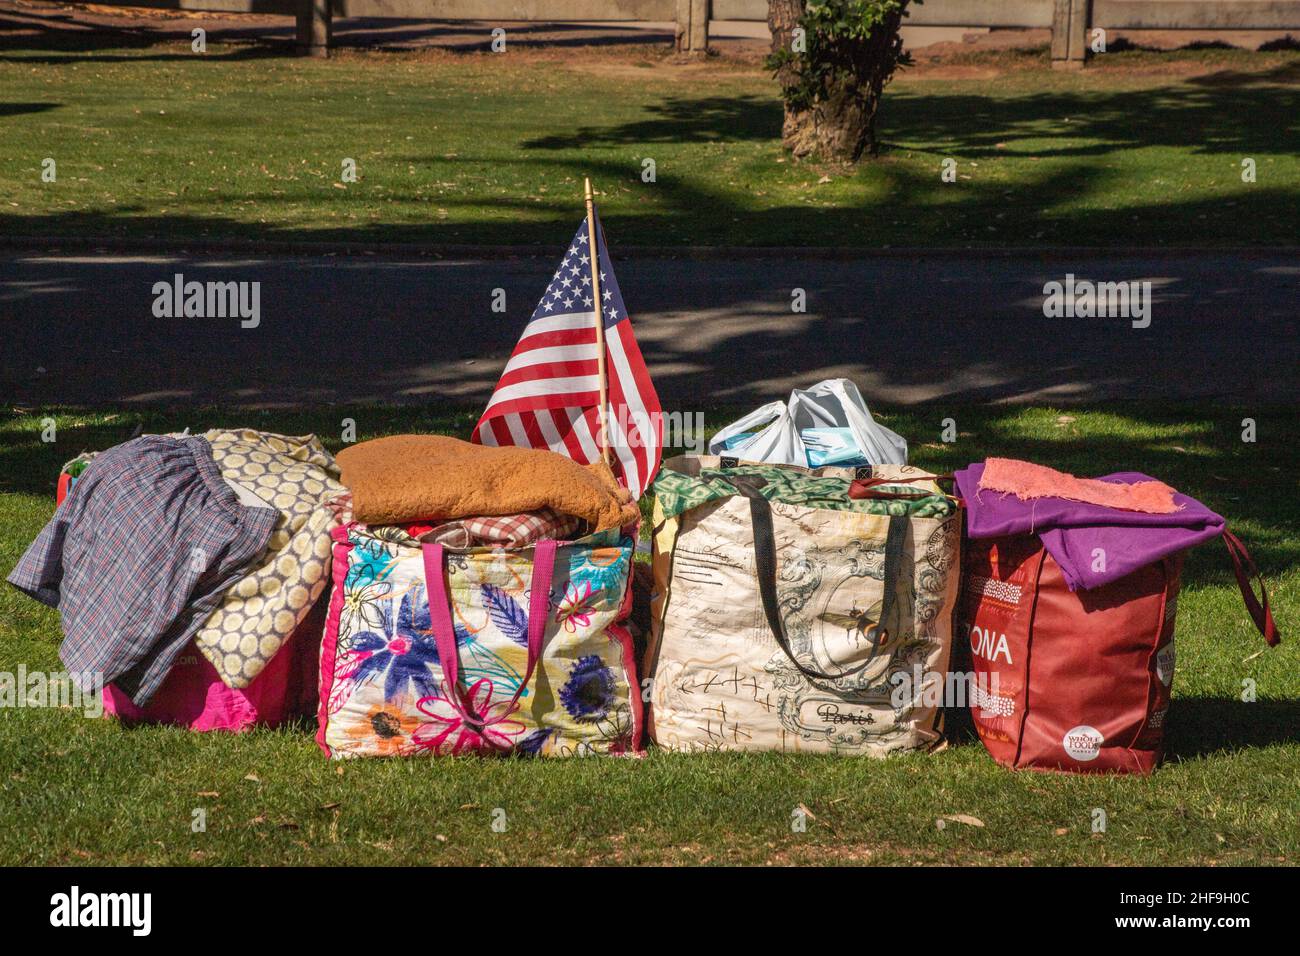 Tote bags holding possessions and clothing of a homeless man include a US flag in an Anaheim, CA, park where the owner will sleep outdoors. Stock Photo